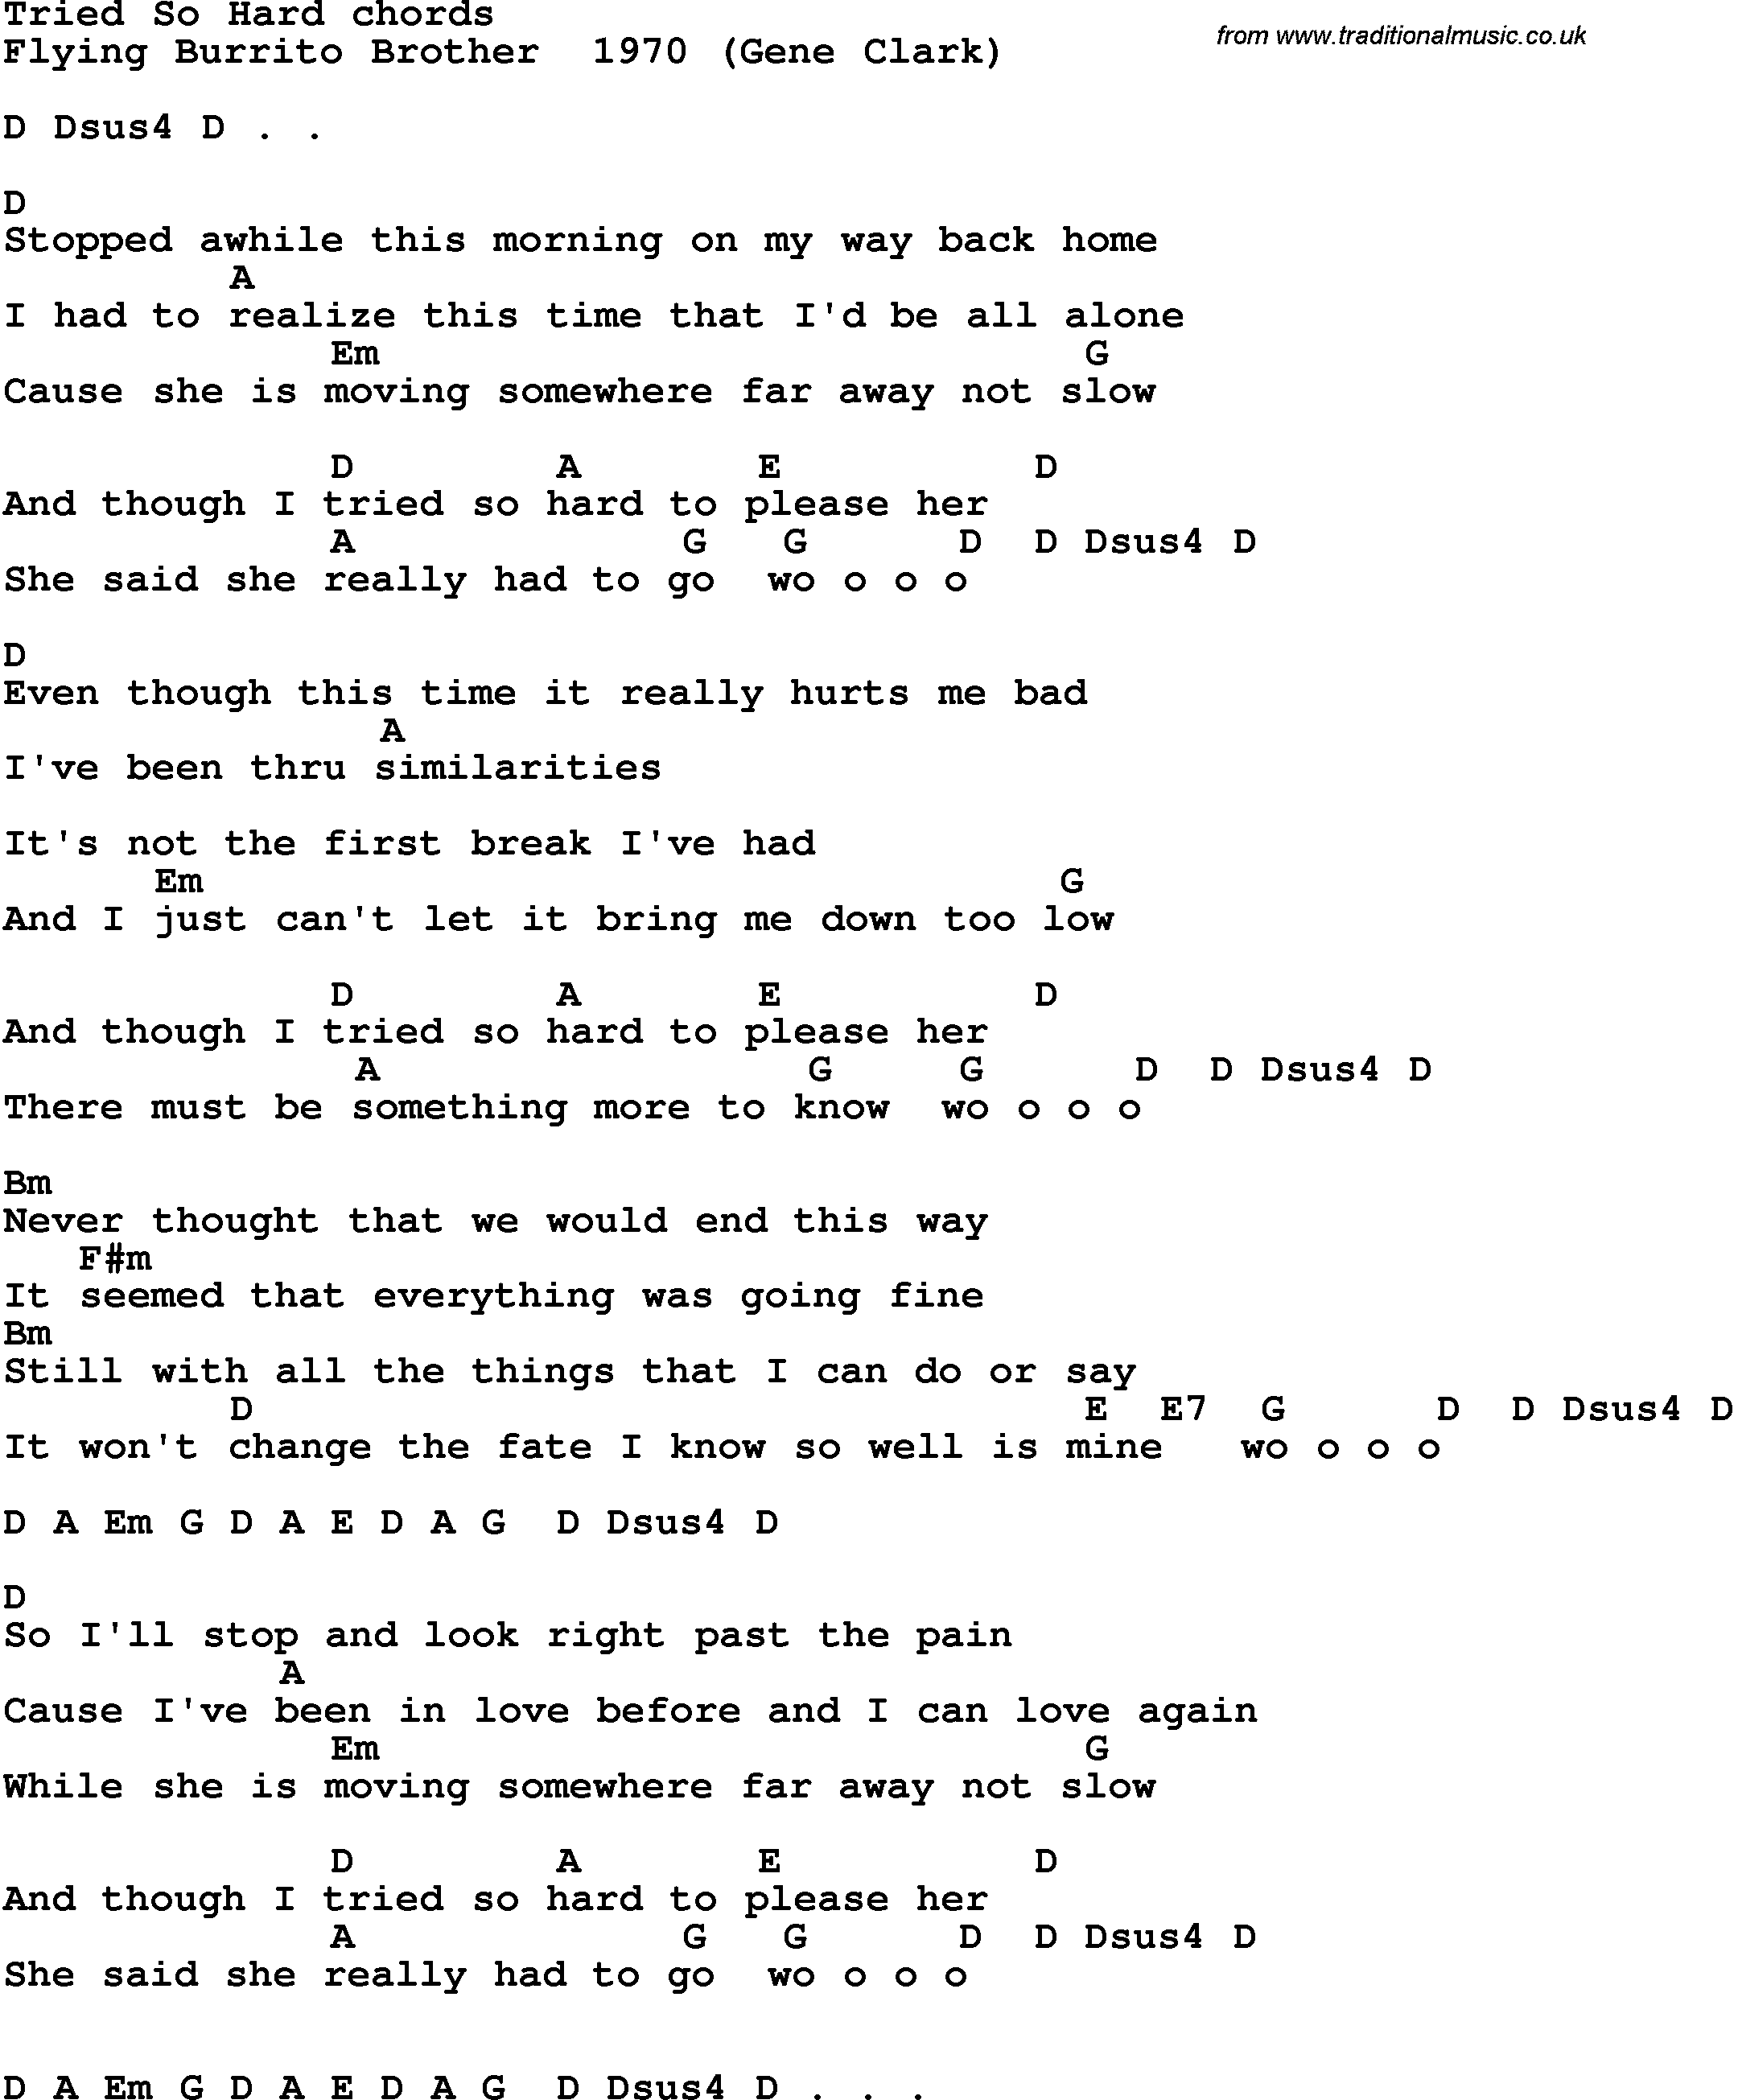 Song Lyrics with guitar chords for Tried So Hard